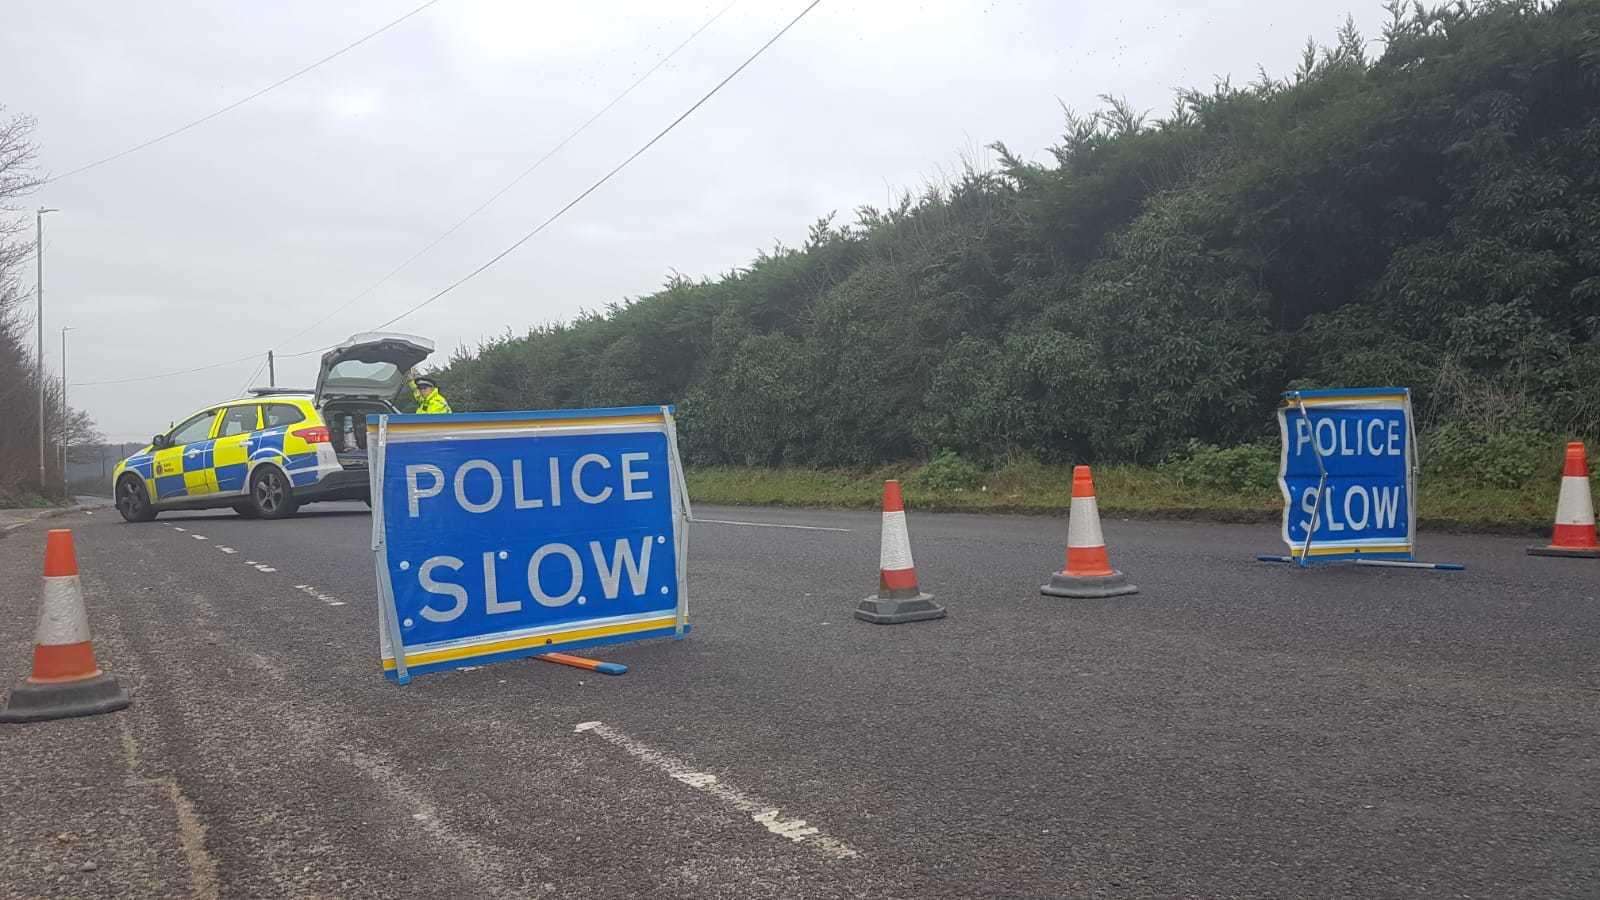 Police have closed the road (6241860)